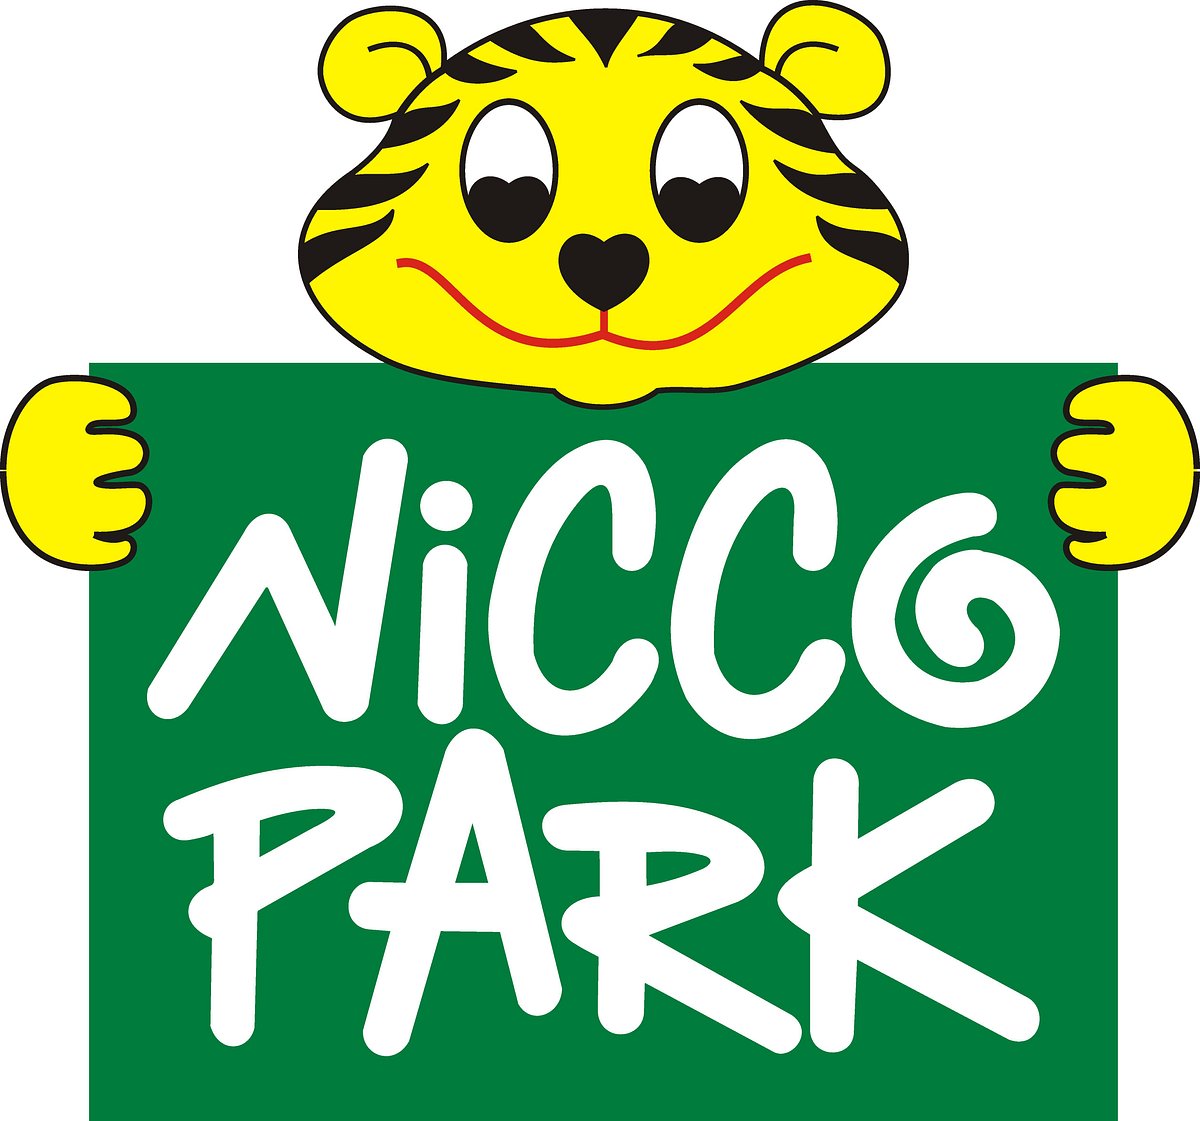 nicco-parks-resorts-limited-kolkata-calcutta-all-you-need-to-know-before-you-go-with